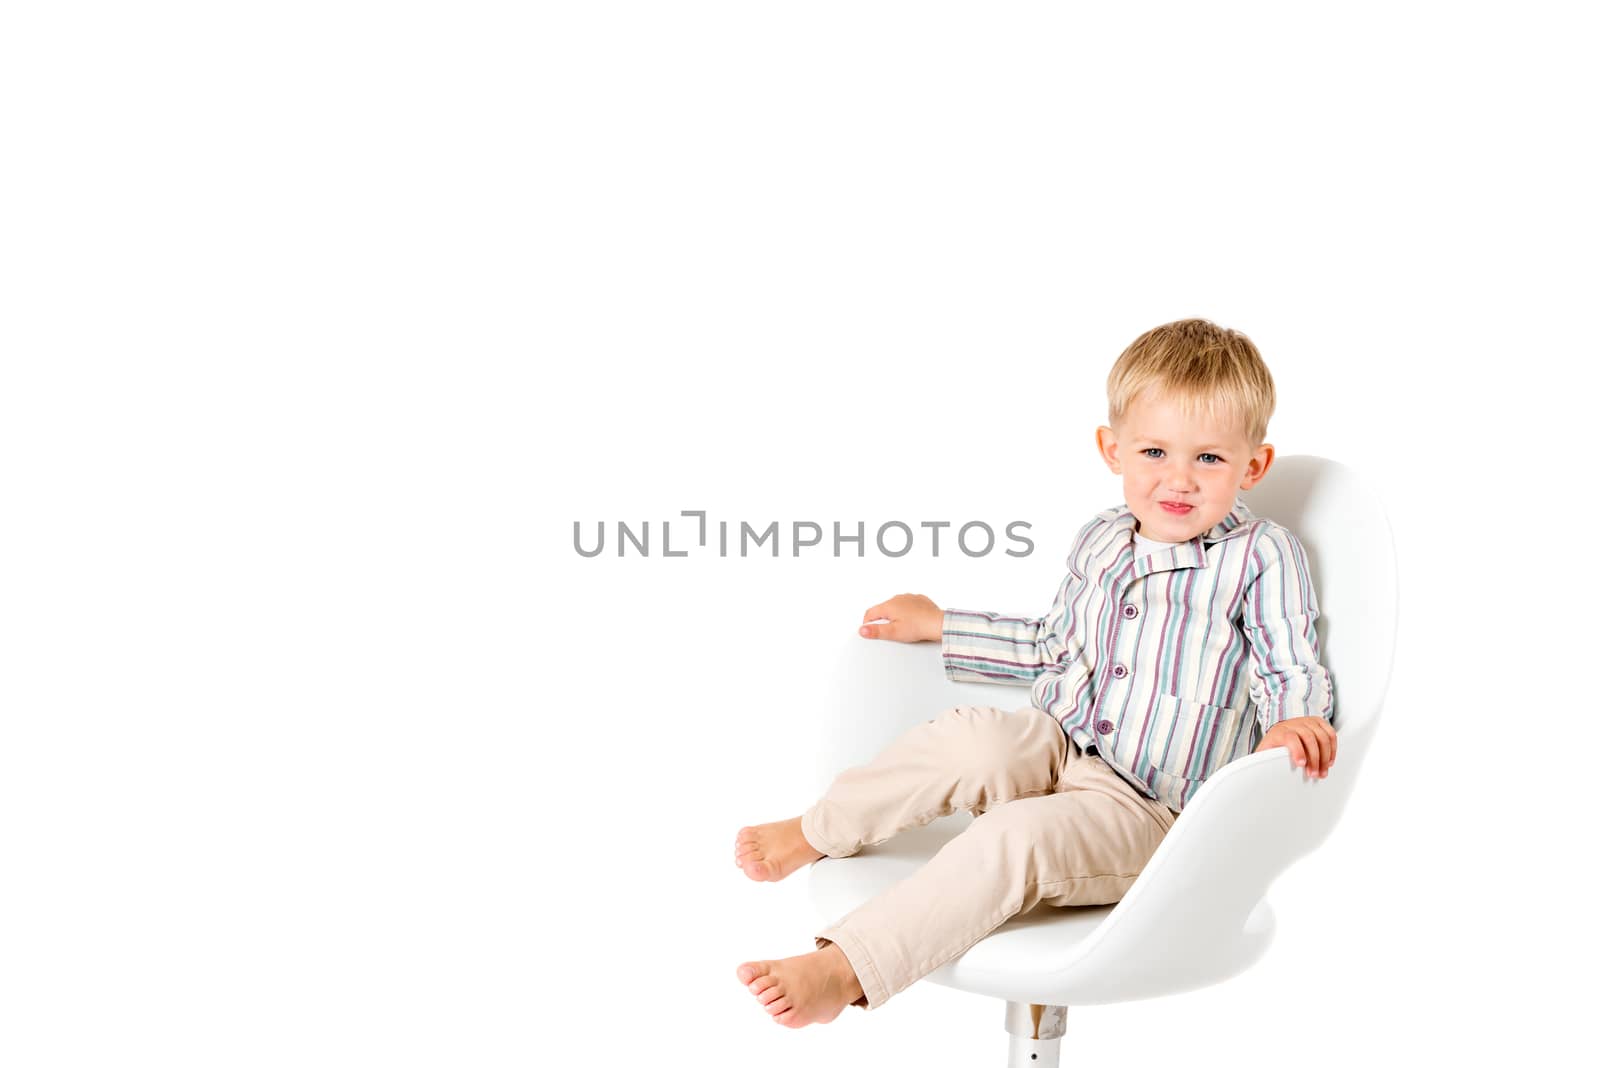 Boy shot in the studio on a white background in chair copy space by Nanisimova